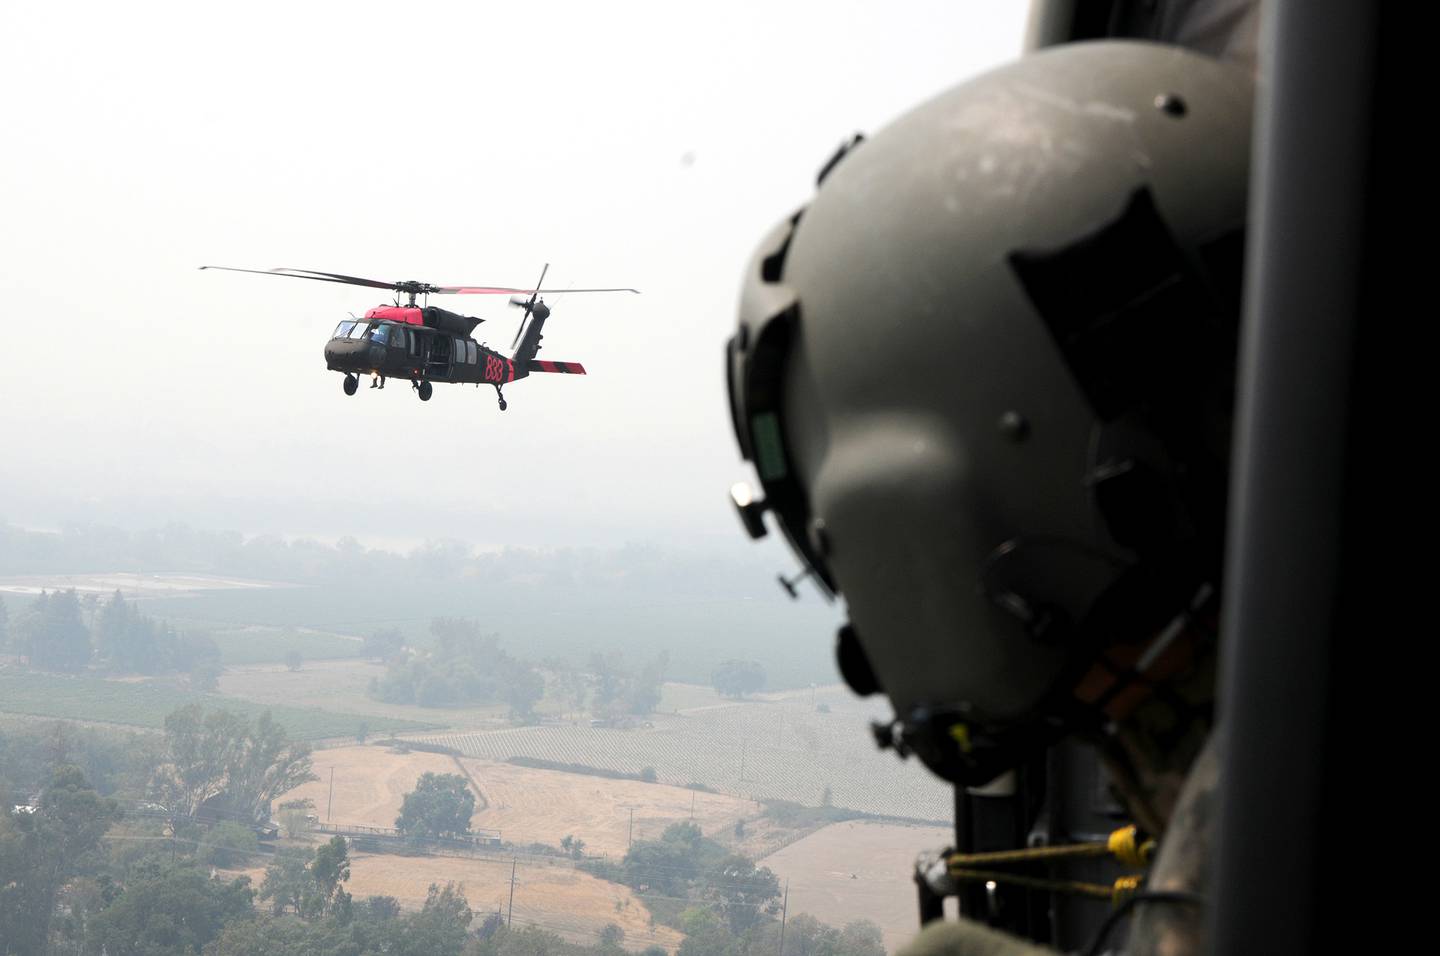 U.S. Army Sgt. Jaime Martinez Jr., a crew chief with 1st Assault Helicopter Battalion, 140th Aviation Regiment, watches his fellow unit members follow him back to refuel, Aug. 23, 2020, in Healdsburg, Calif.